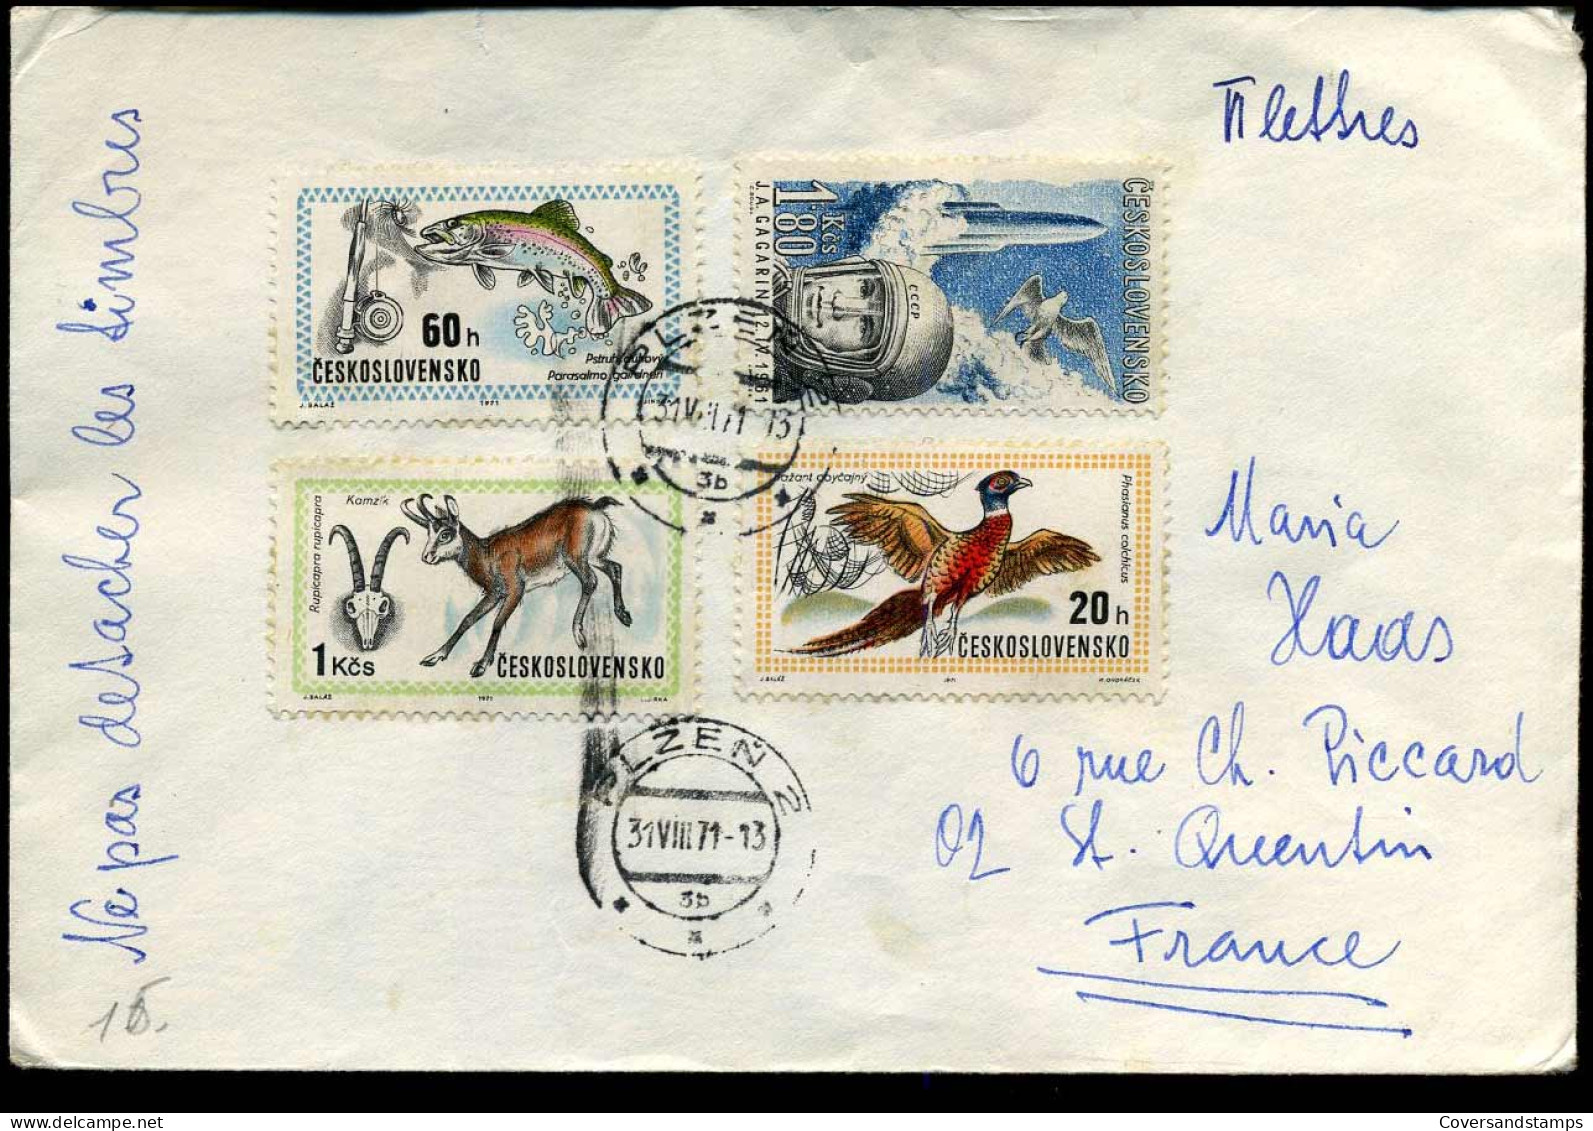 Cover To St-Quentain, France - Storia Postale